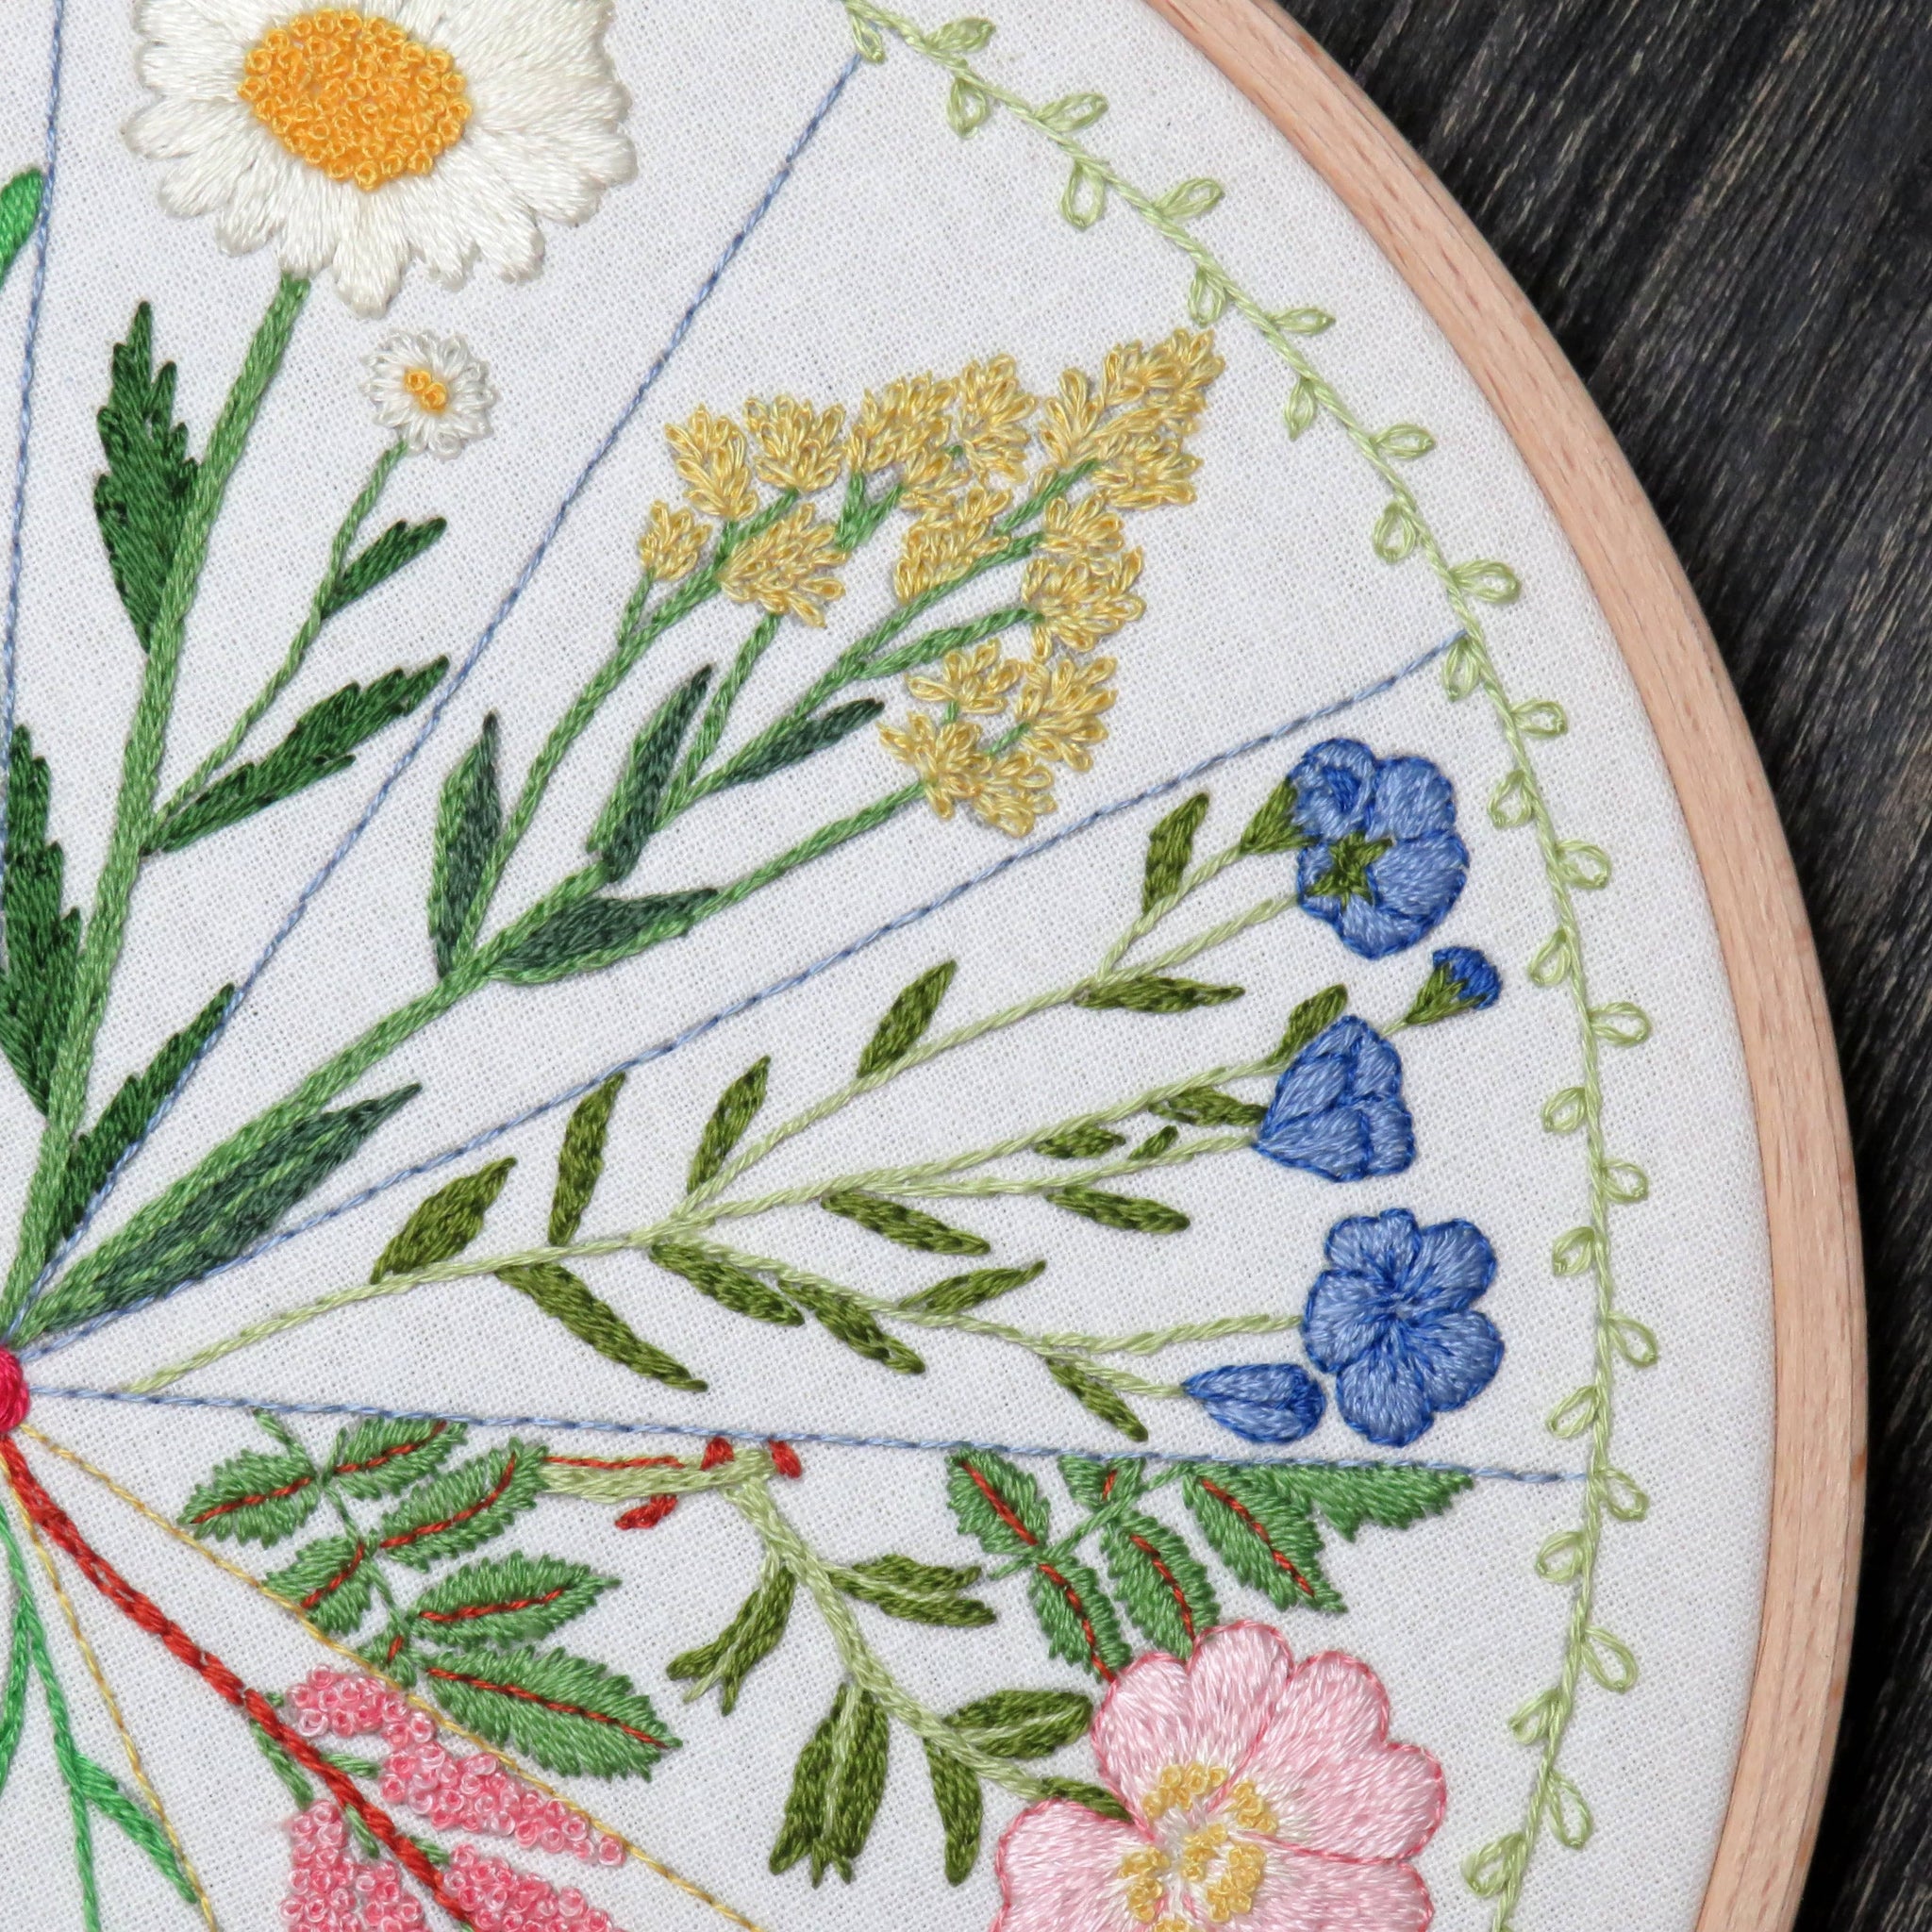 A Year of Woodland Blossoms Stitch A Long , SAL Course , Thinkific , embroidery hoop kit, Embroidery Kit, embroidery kit for adults, embroidery kit fro beginners, embroidery pattern, flower embroidery, hand embroidery, hand embroidery kit, hand embroidery pattern, modern embroidery kits, month embroidery, PDF pattern, Thinkific, year embroidery , StitchDoodles , shop.stitchdoodles.com